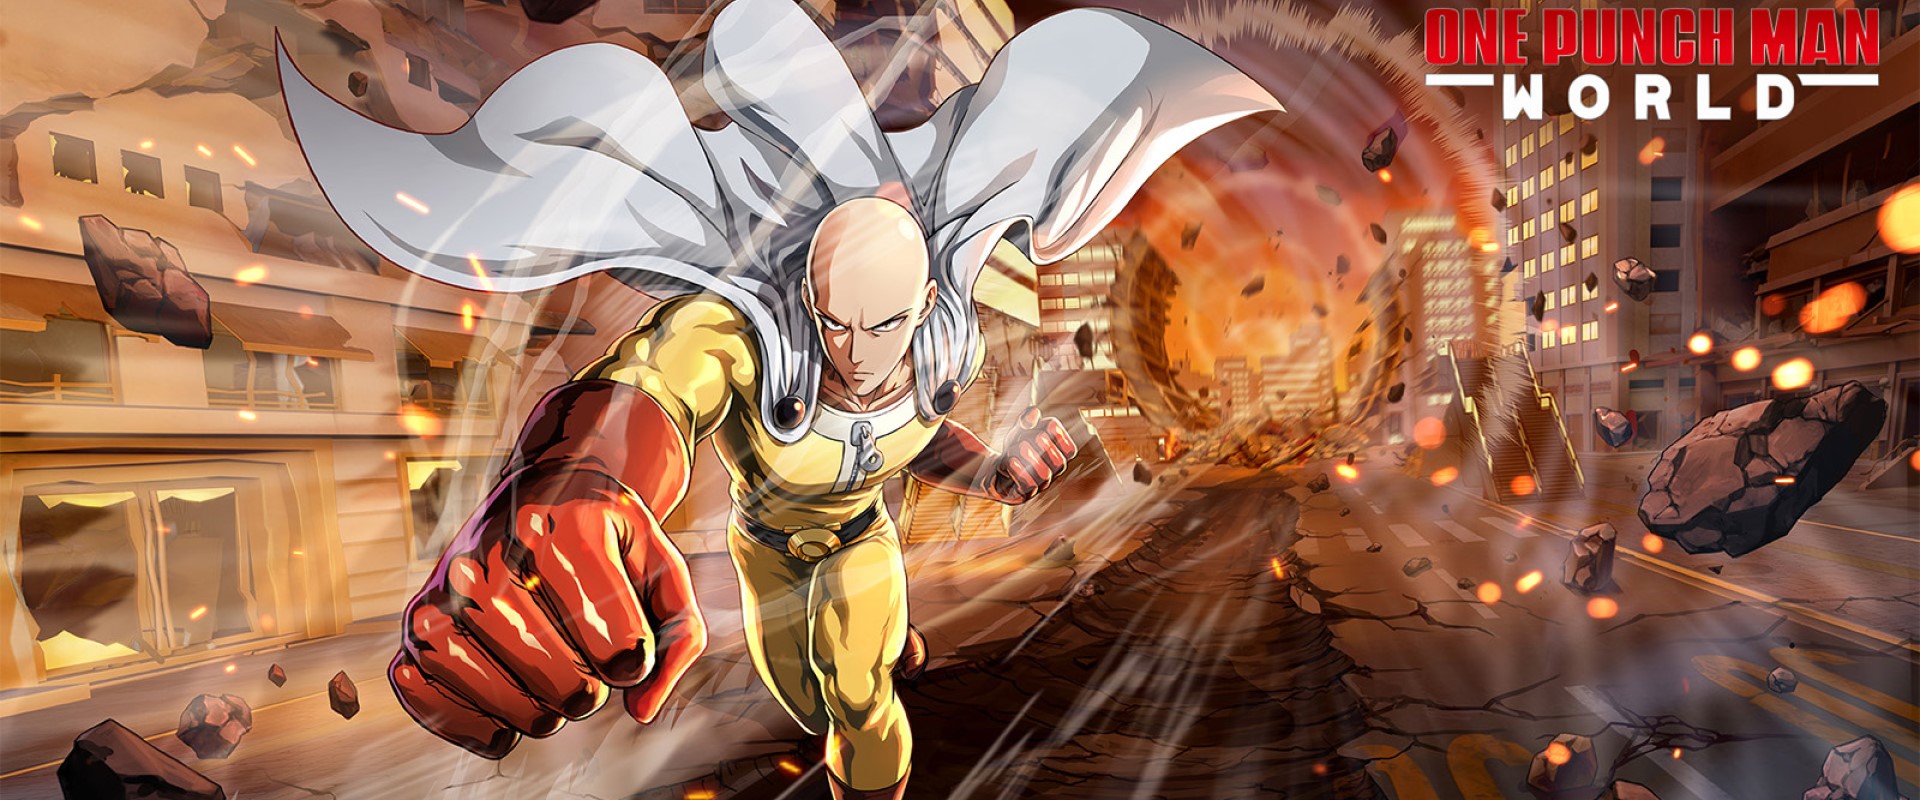 Download & Play One Punch Man World on PC & Mac with NoxPlayer (Emulator)